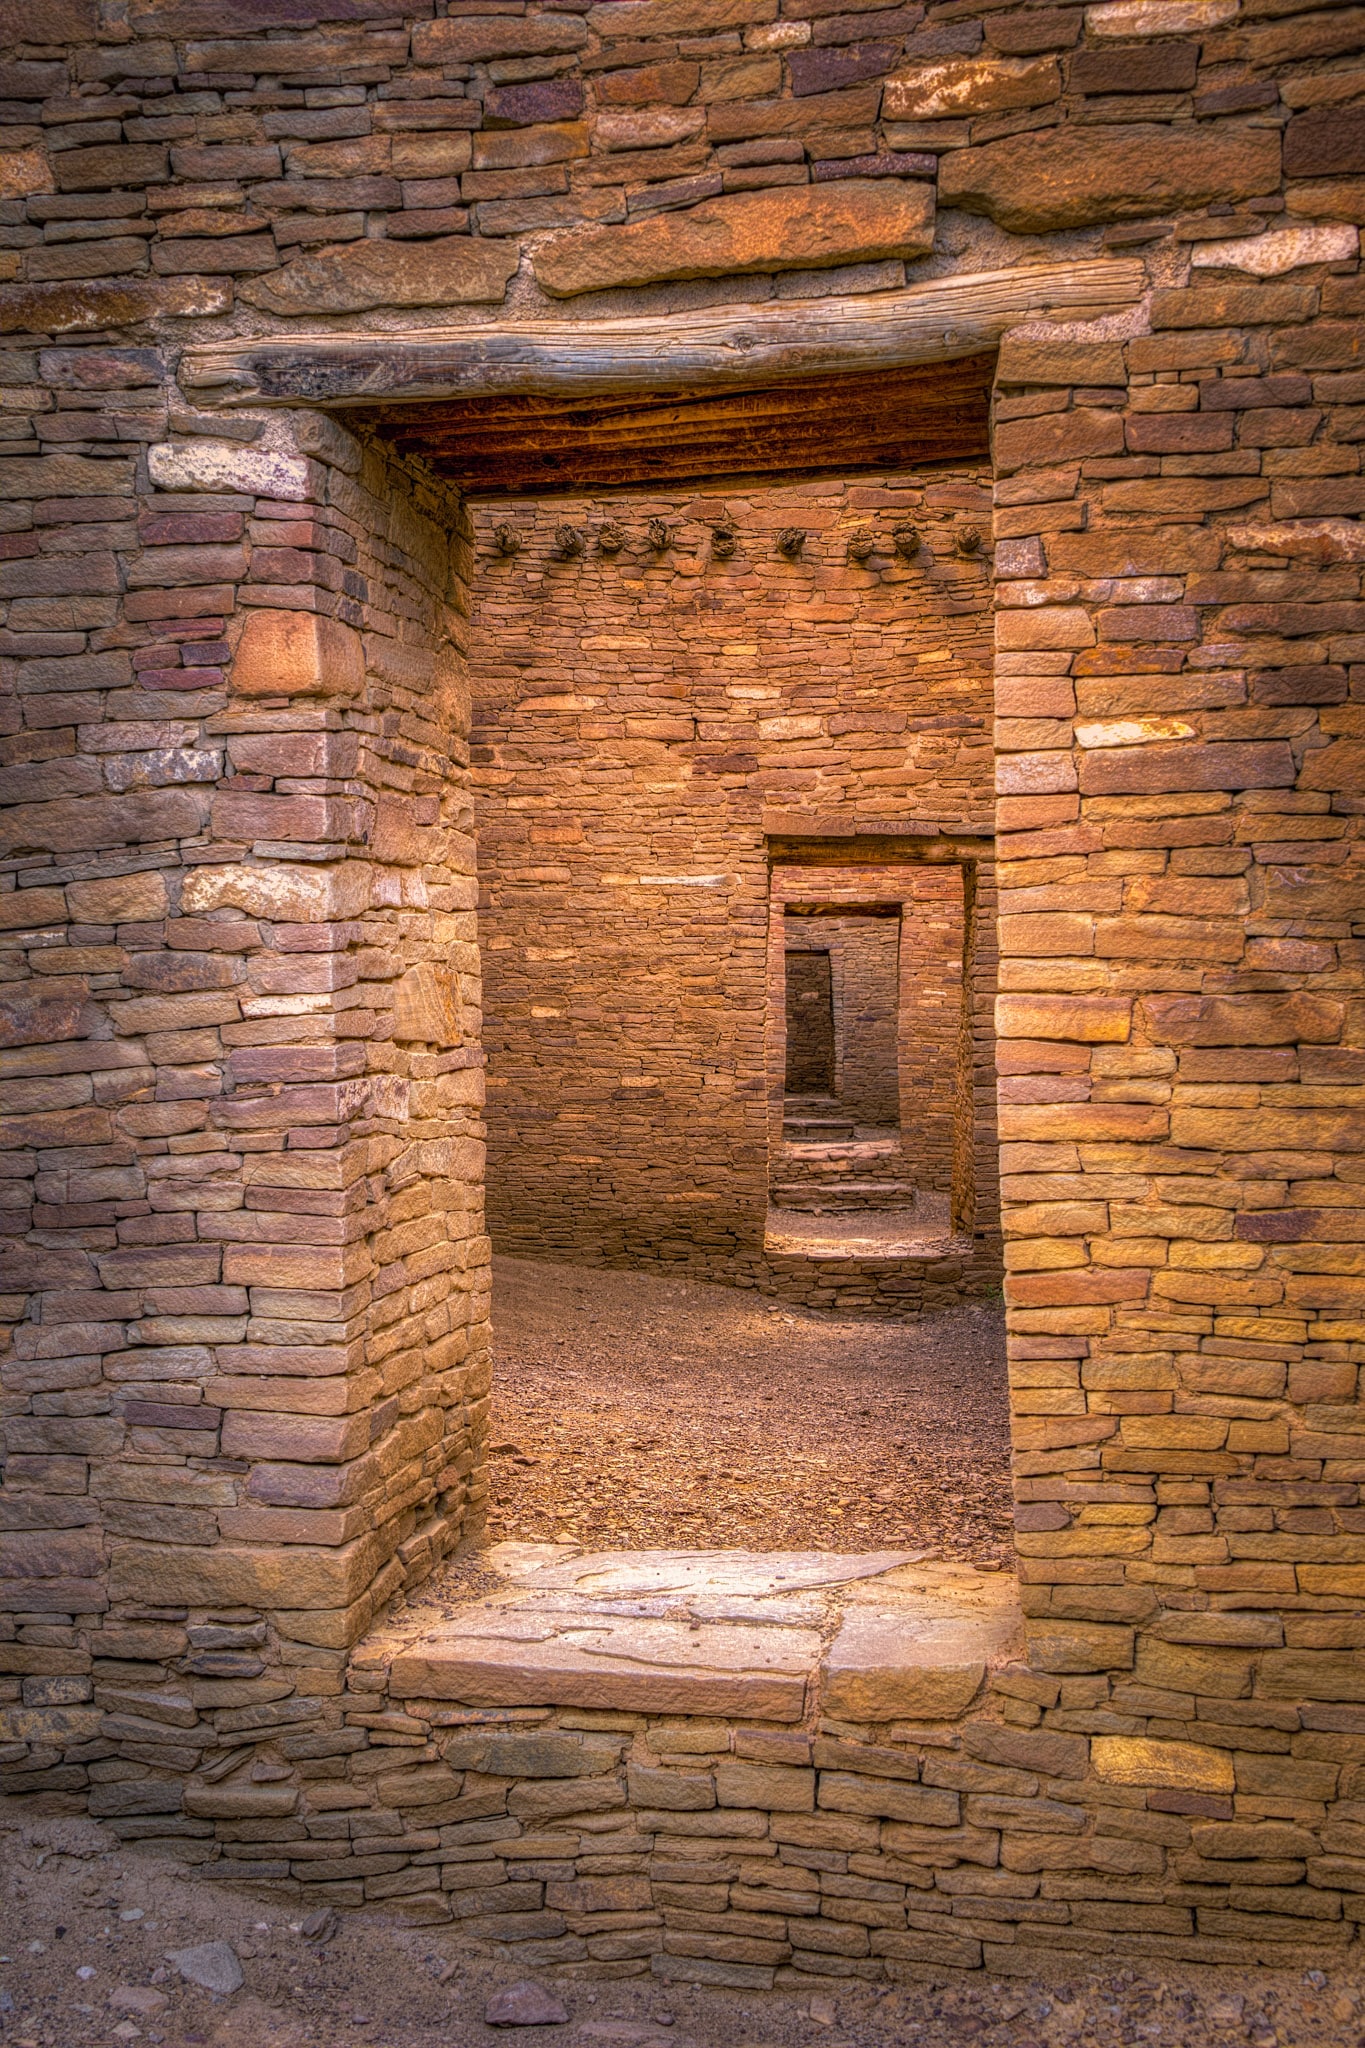 This is one of the most iconic views in Chaco Canyon. It is a shot looking through series of doorways through walls in Pueblo Bonito, located in Chaco Wash, New Mexico.